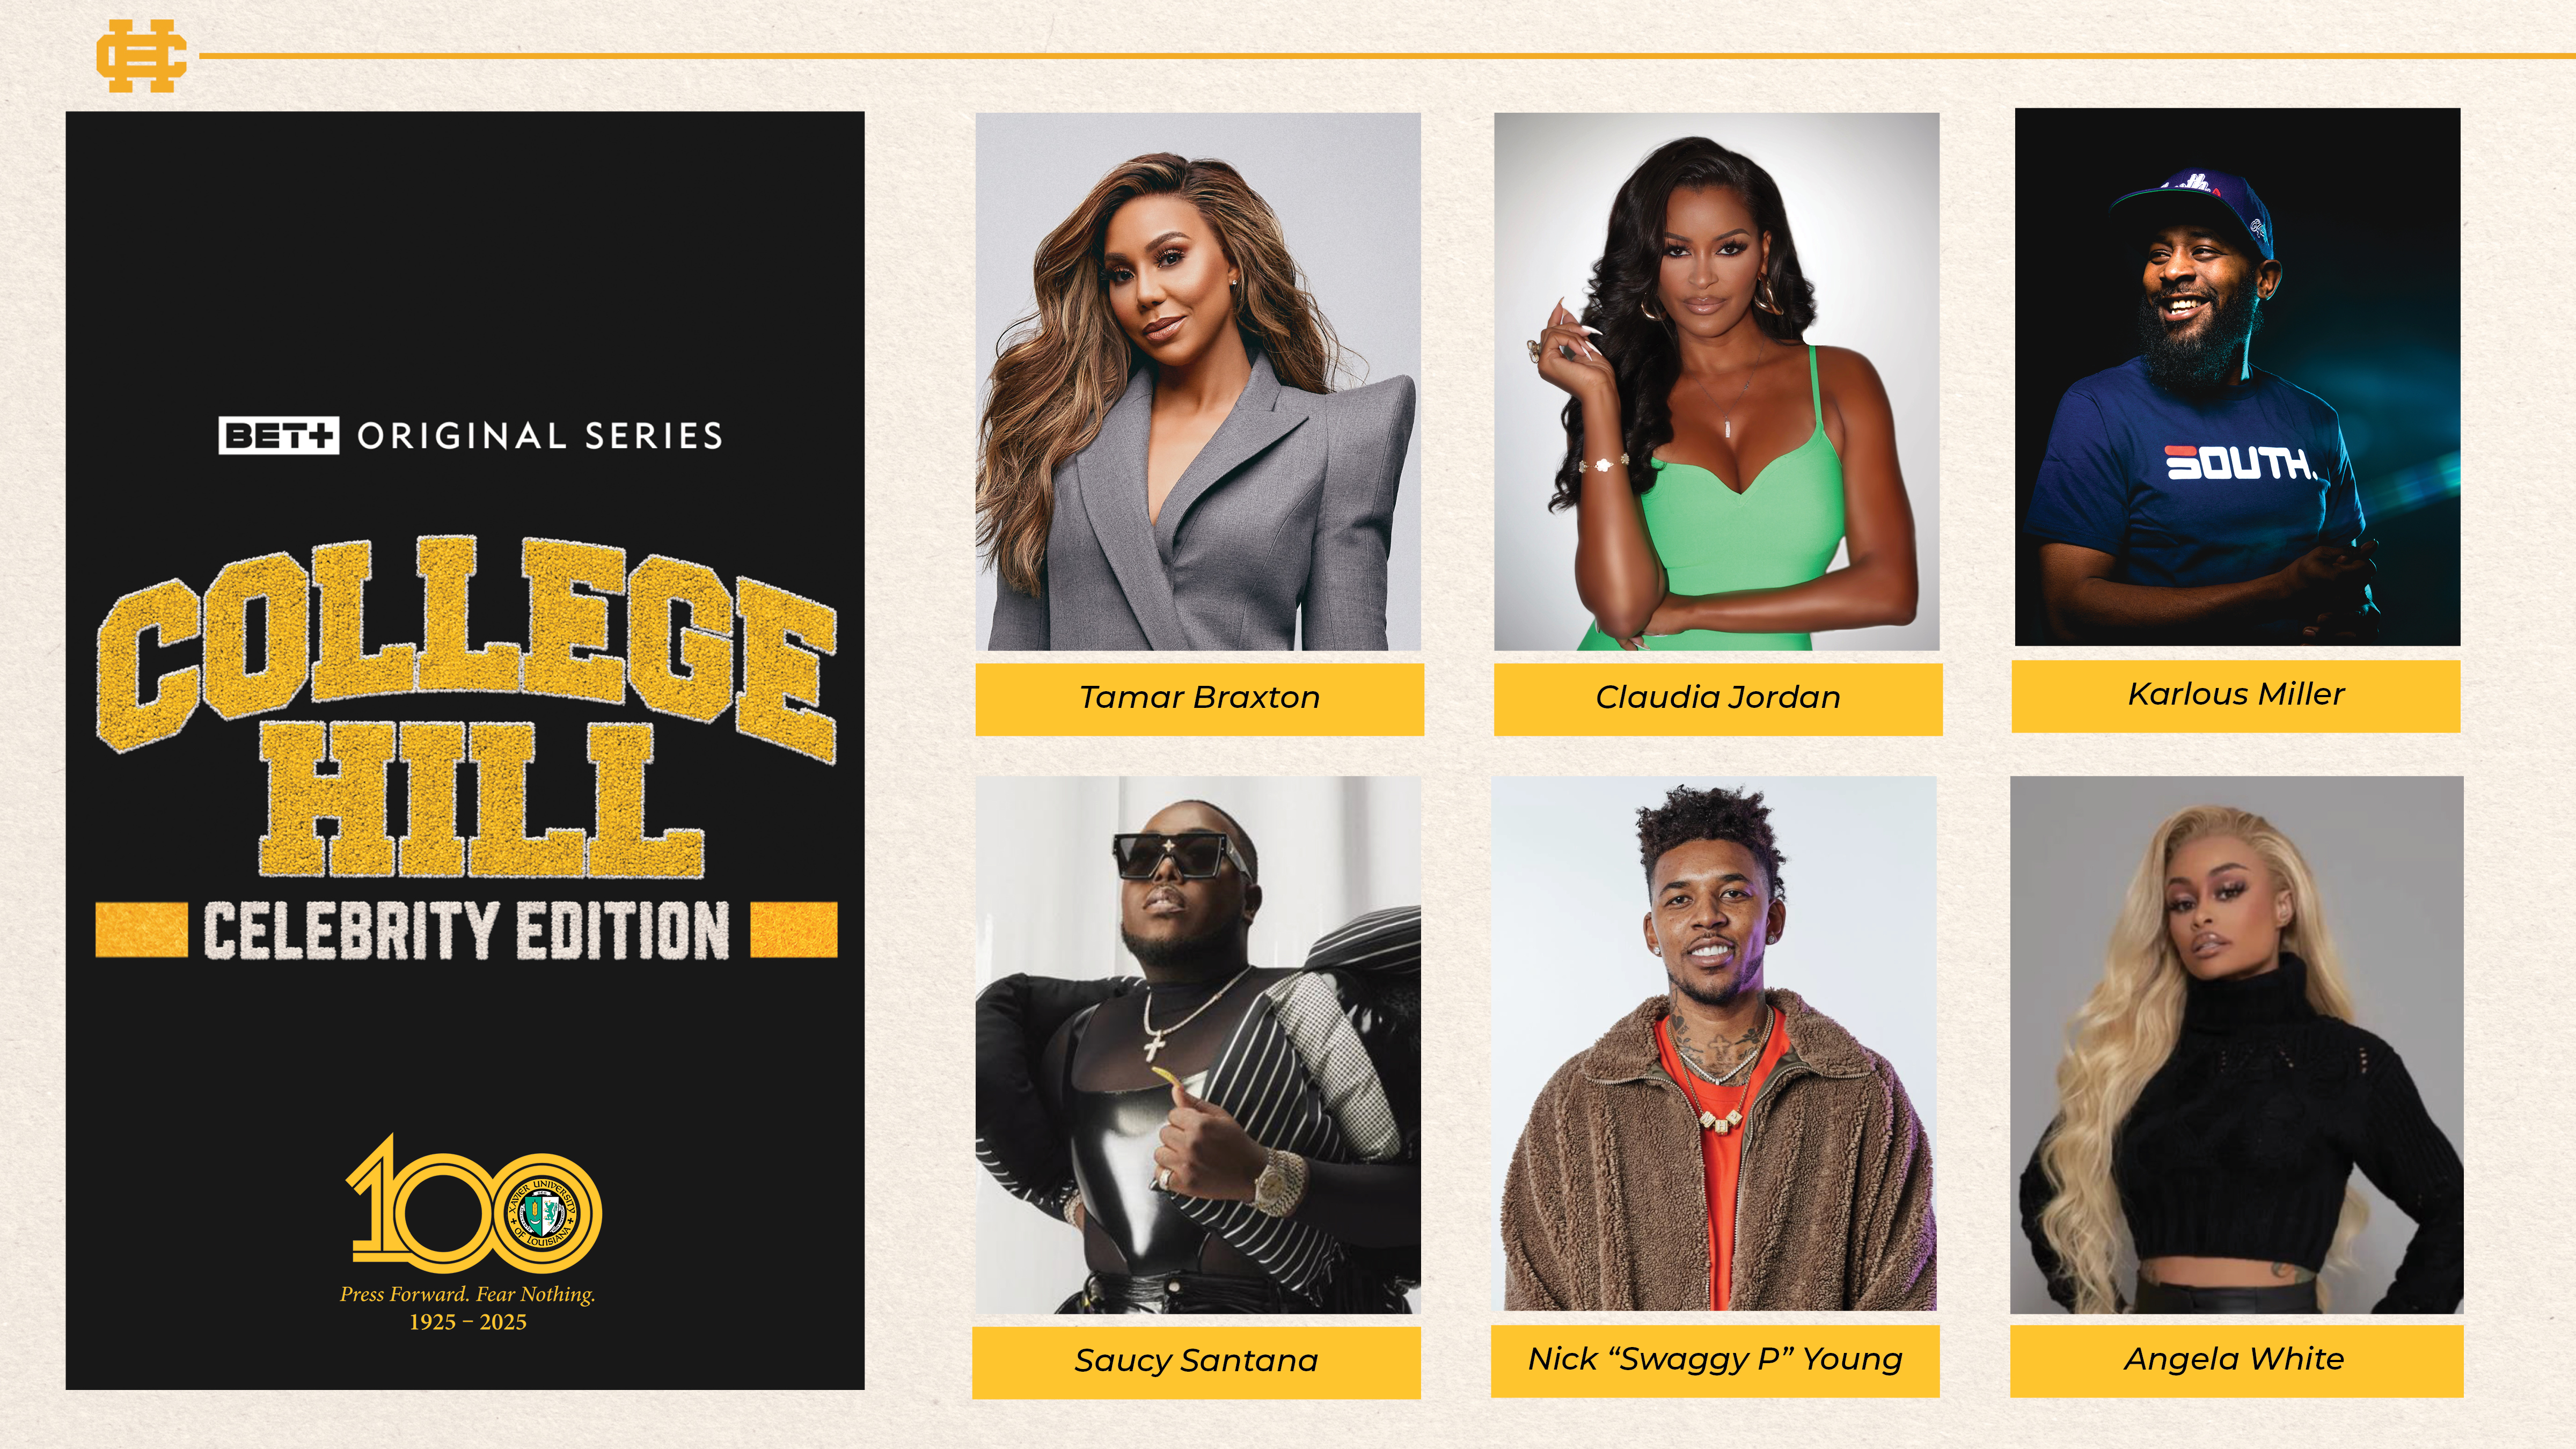 BET+ Announces Hit Reality Series "College Hill: Celebrity Edition" Will Return for Third Season with A New Wave of Celebrities at Xavier University of Louisiana